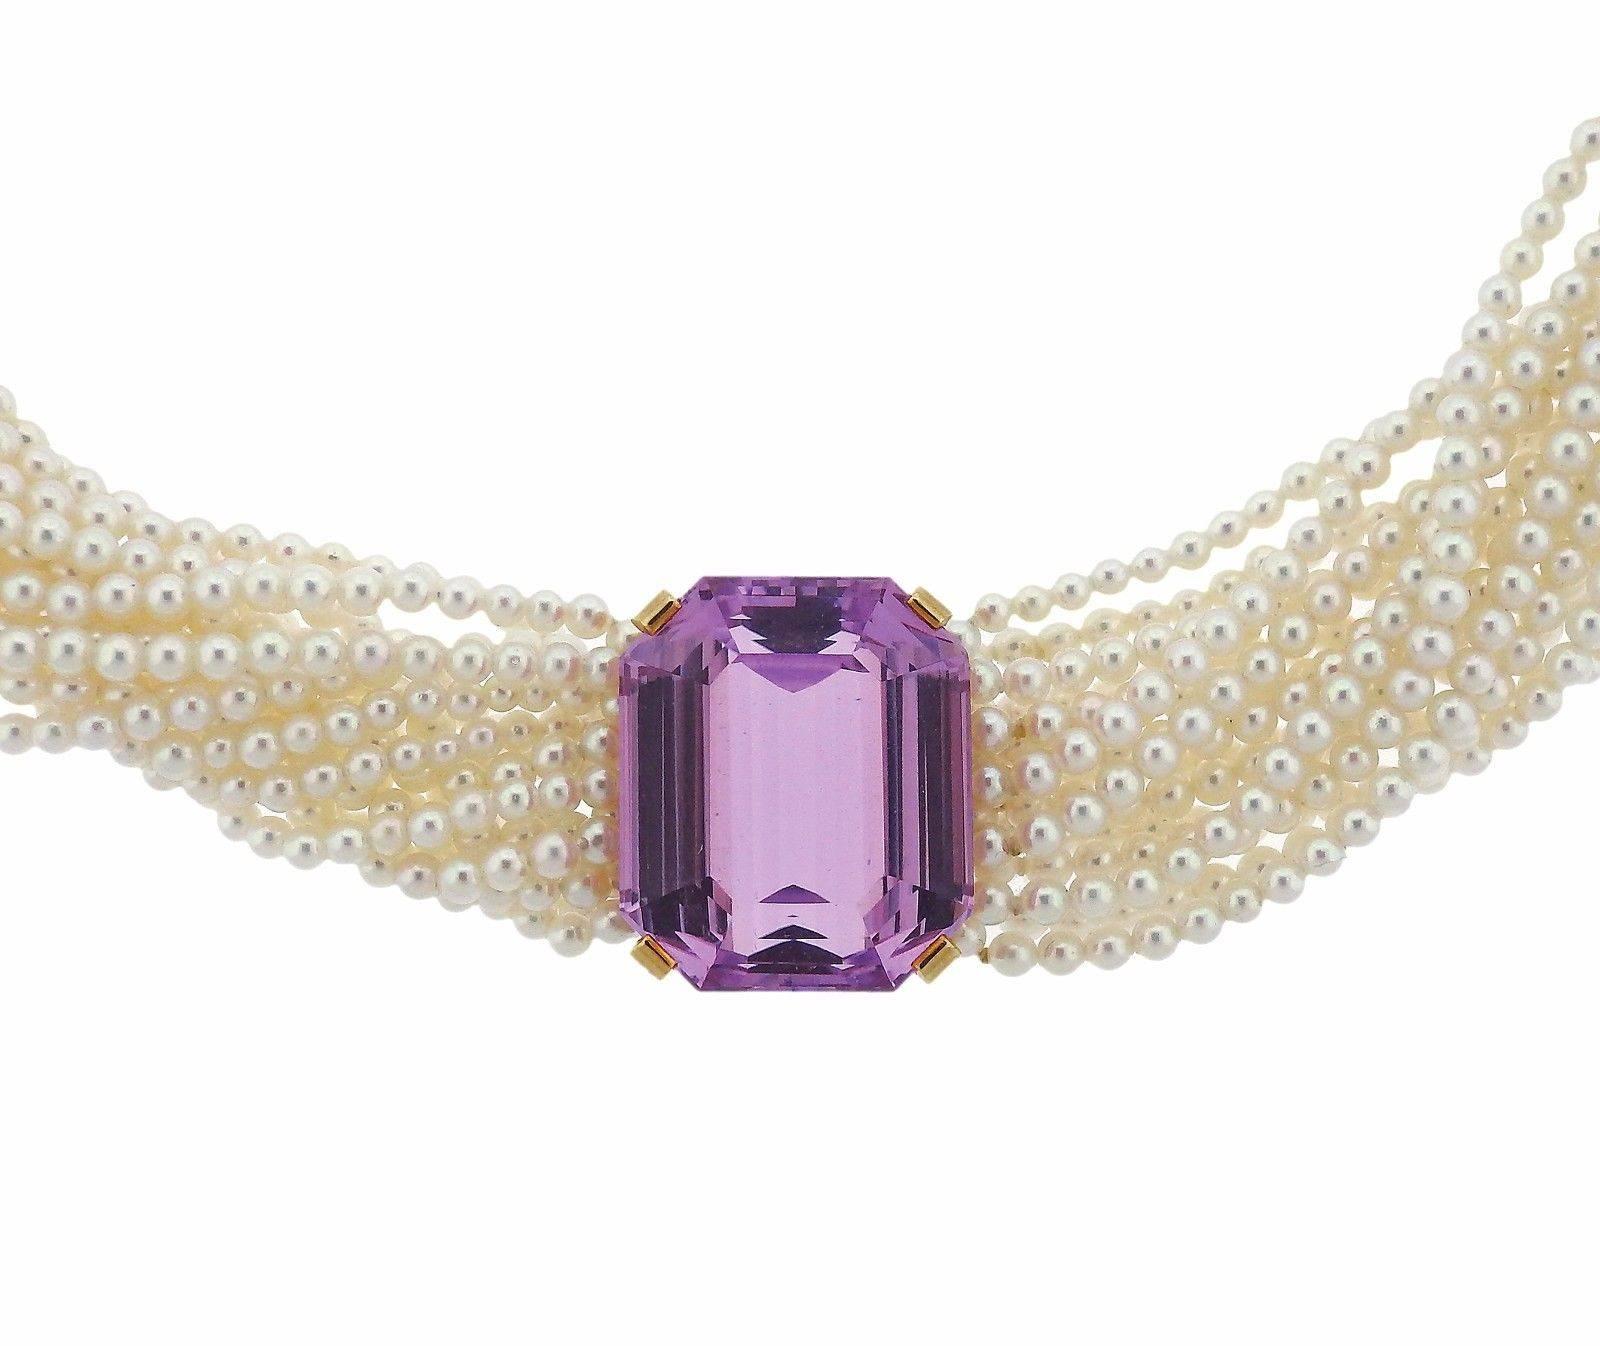 An 18k gold torsade necklace set with 2,5mm pearls and a kunzite measuring 20.8mm x 17.5mm.  The necklace is 13